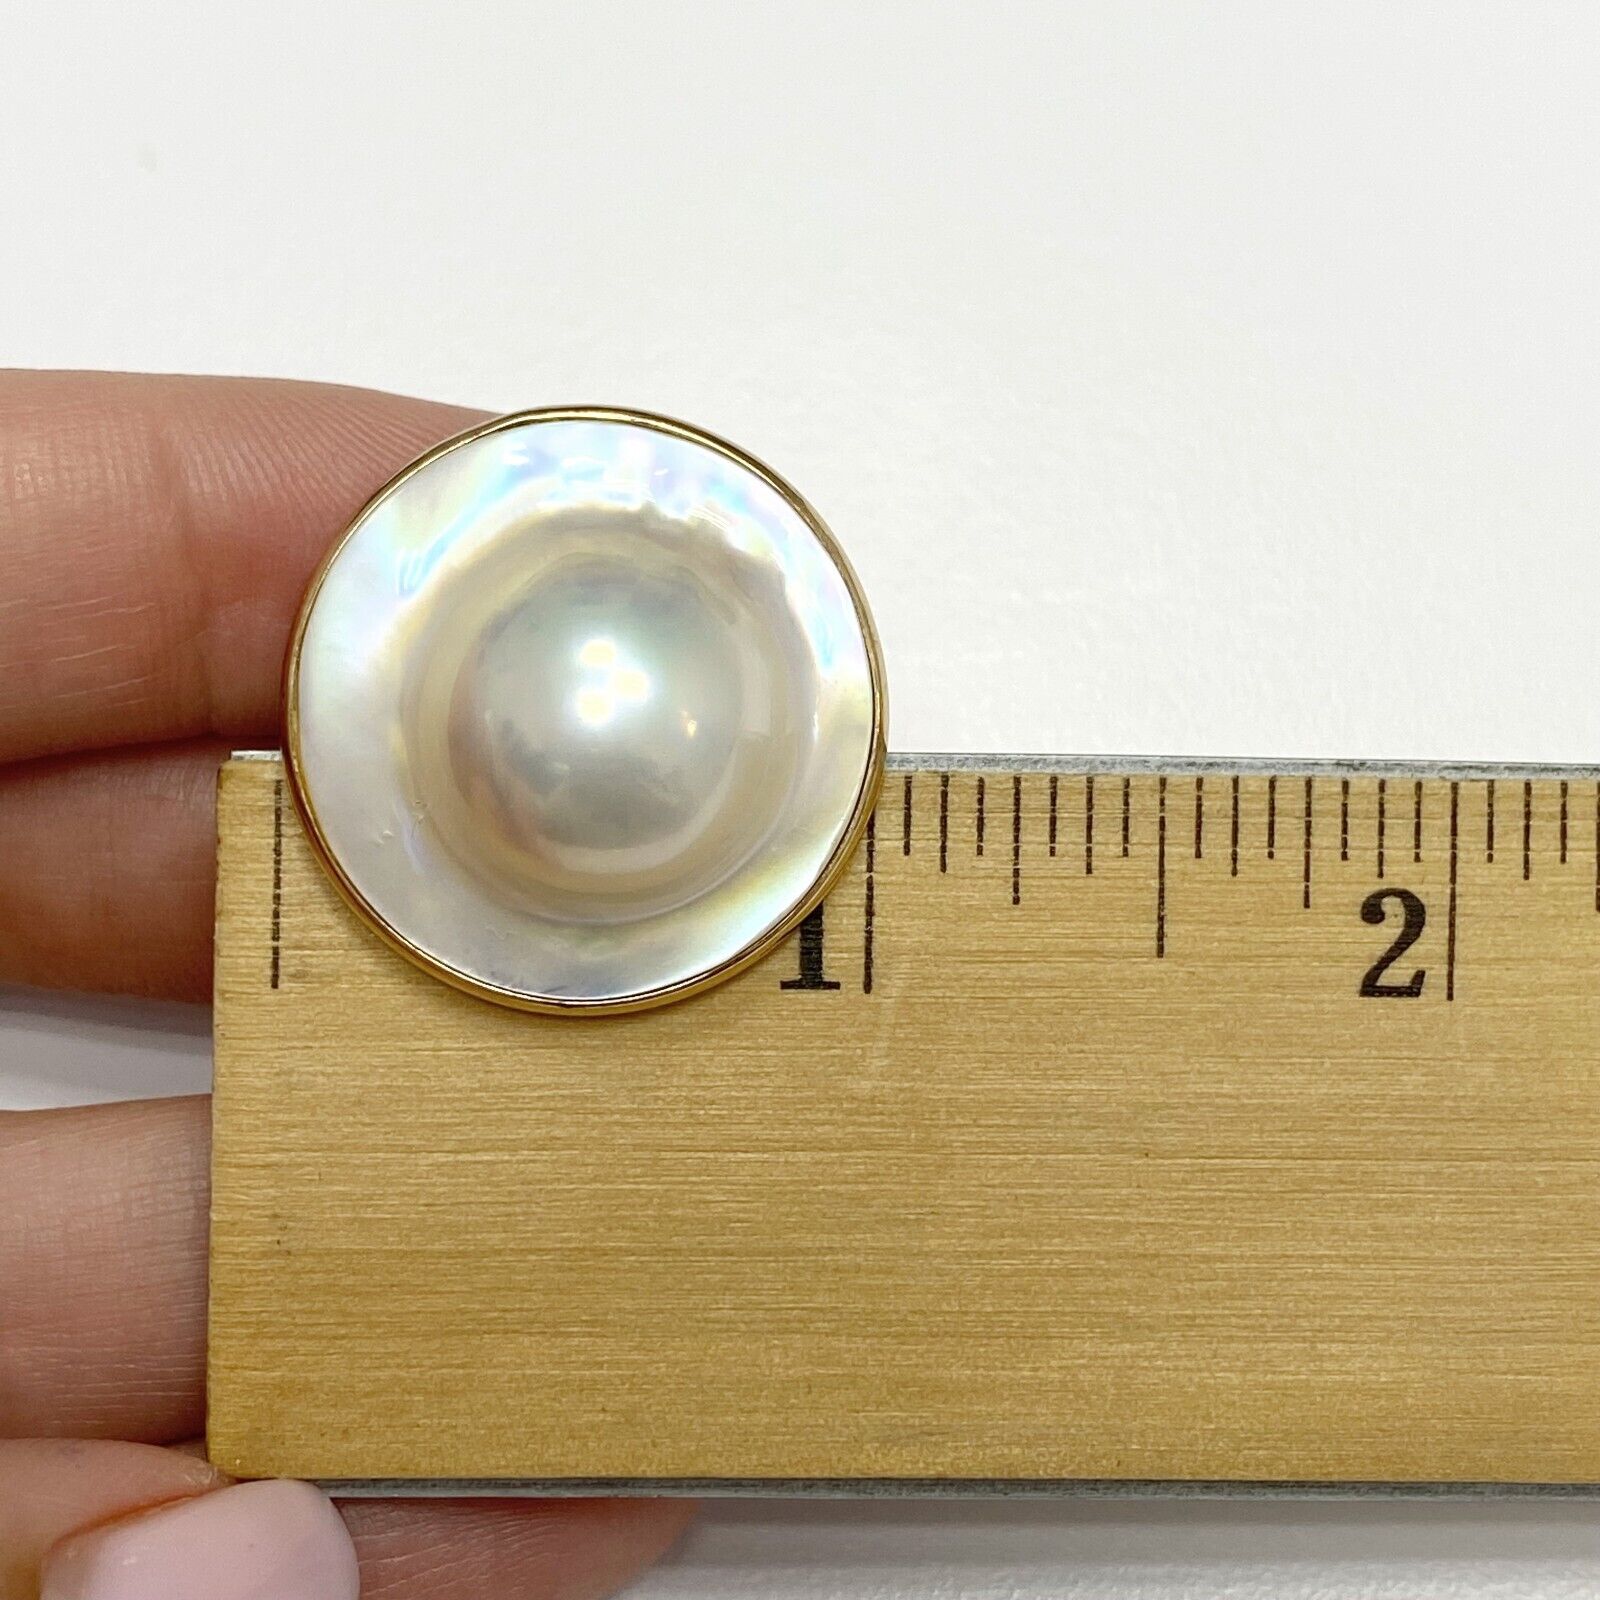 Vintage 14k Yellow Gold Mabe Mother Pearl Round Clip on Earrings